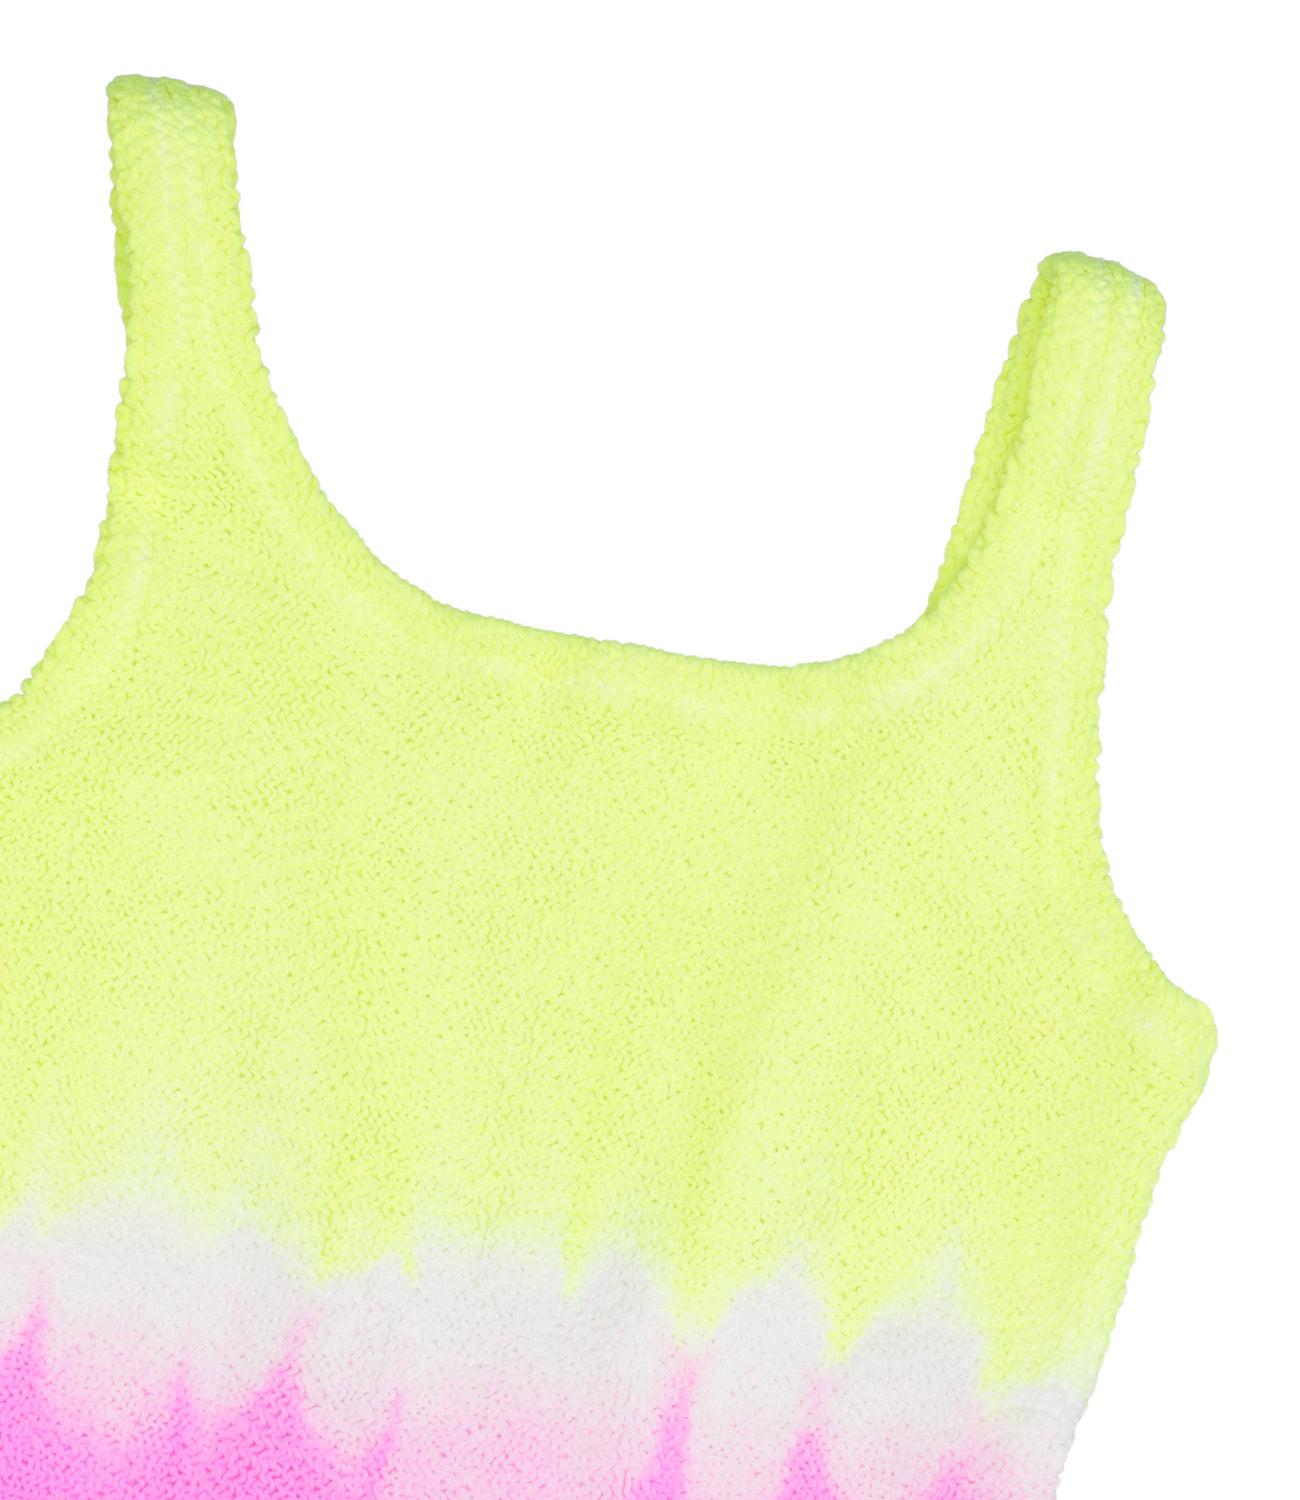 MC2 Saint Barth Kids | Yellow and Fuxia One-piece Swimsuit